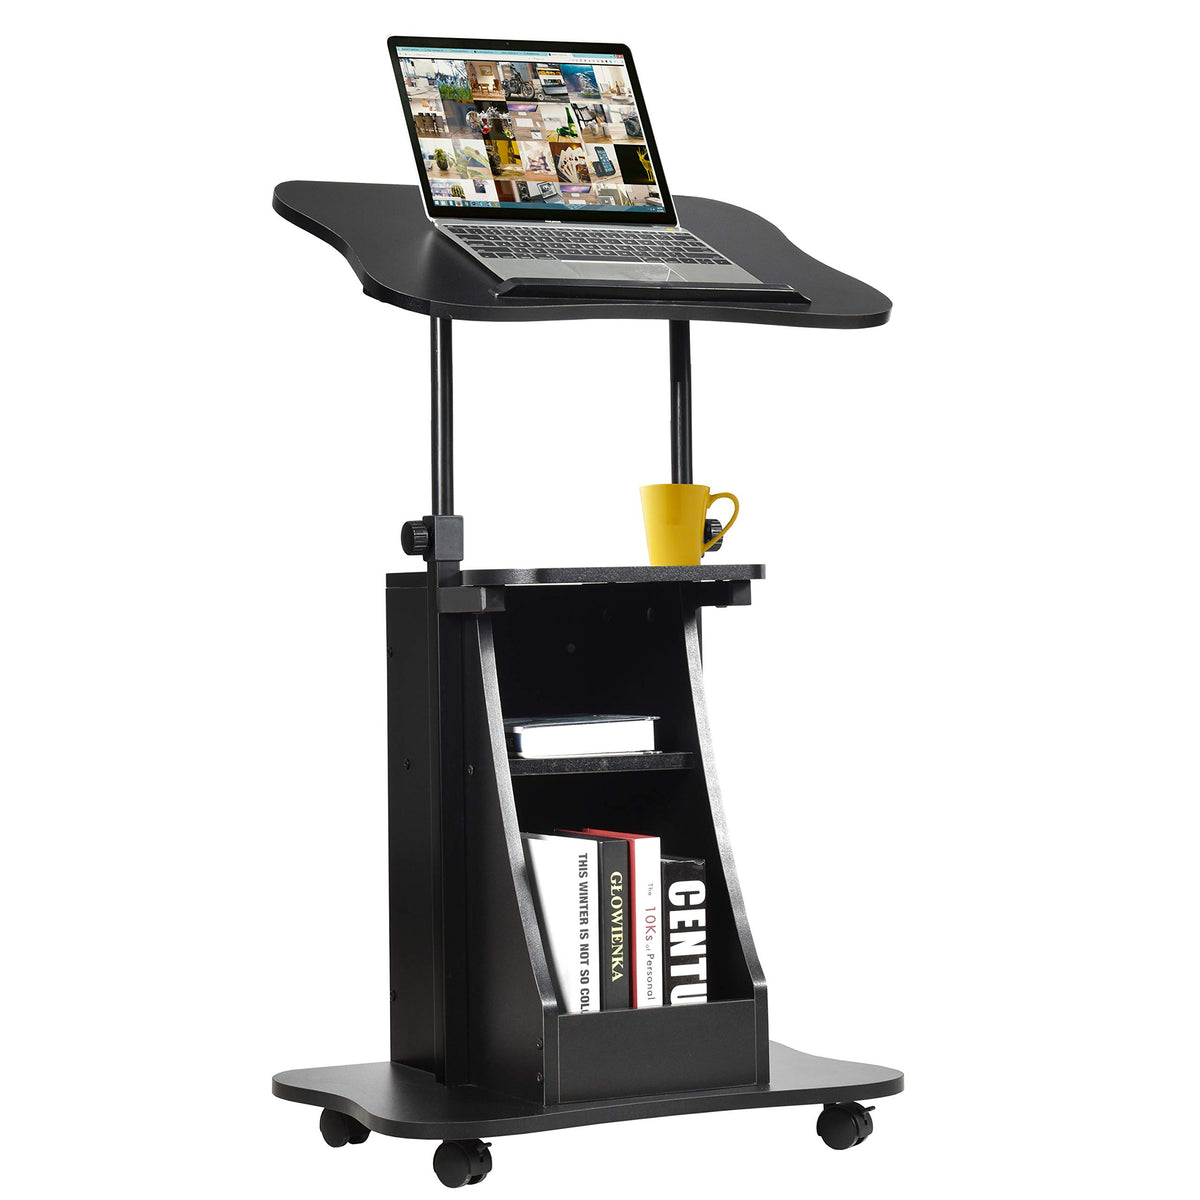 Giantex Mobile Laptop Desk, Height Adjustable Computer iPad PC Stand Table w/Wheels & Storage